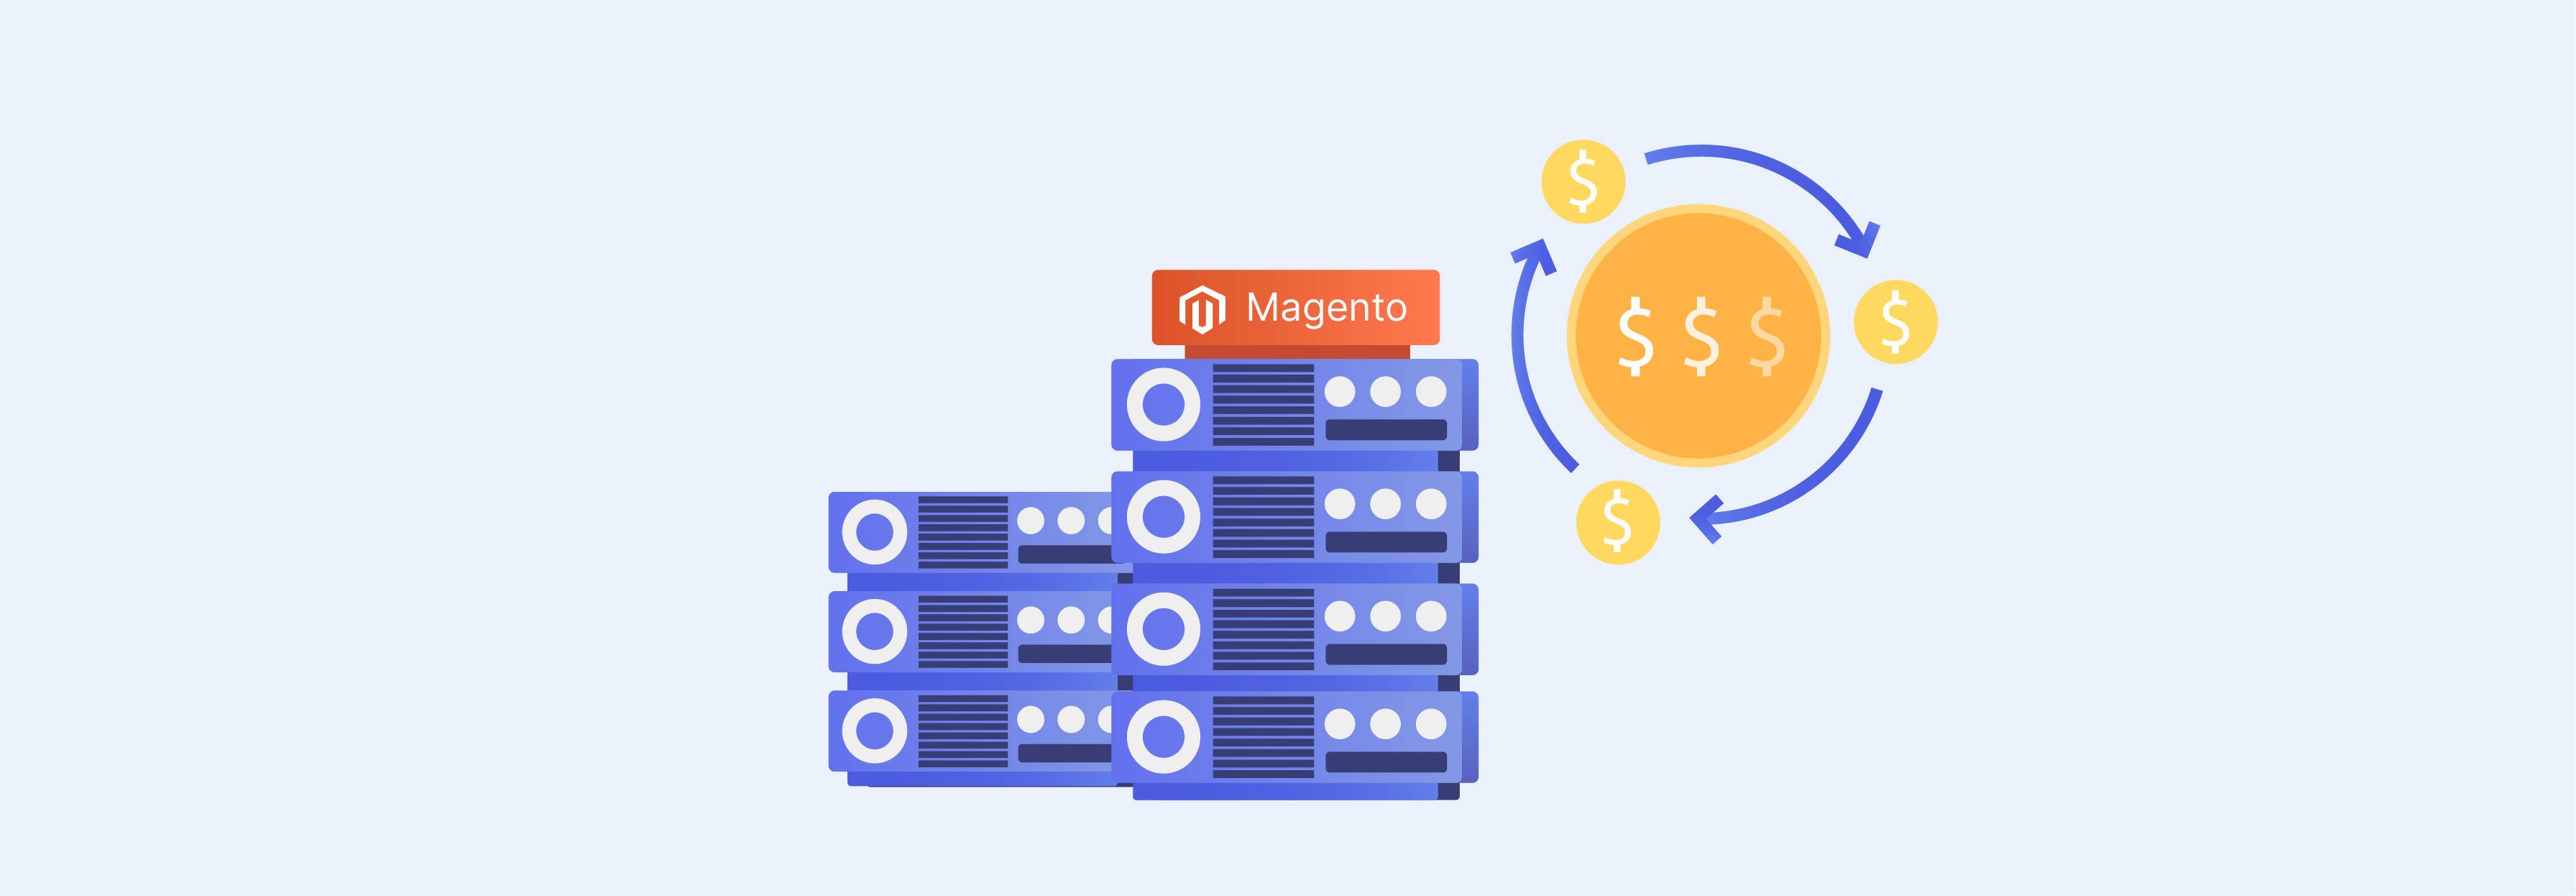 Managing costs effectively with Magento hosting solutions